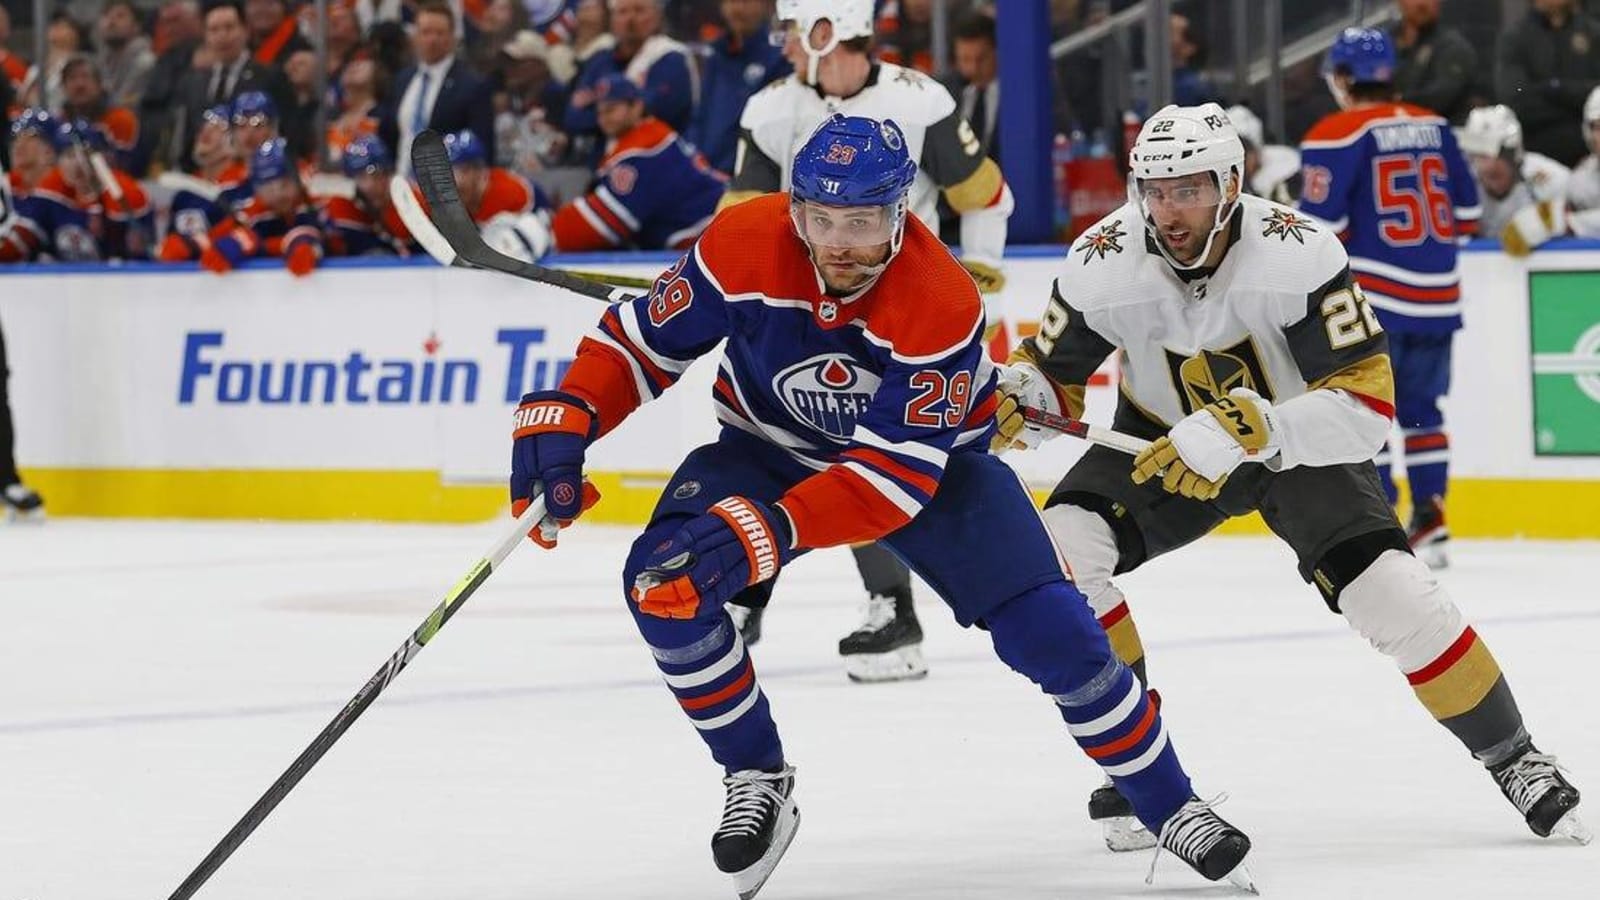 Edmonton Oilers at Vegas Golden Knights prediction, pick for 3/28: Oilers move on from milestone night